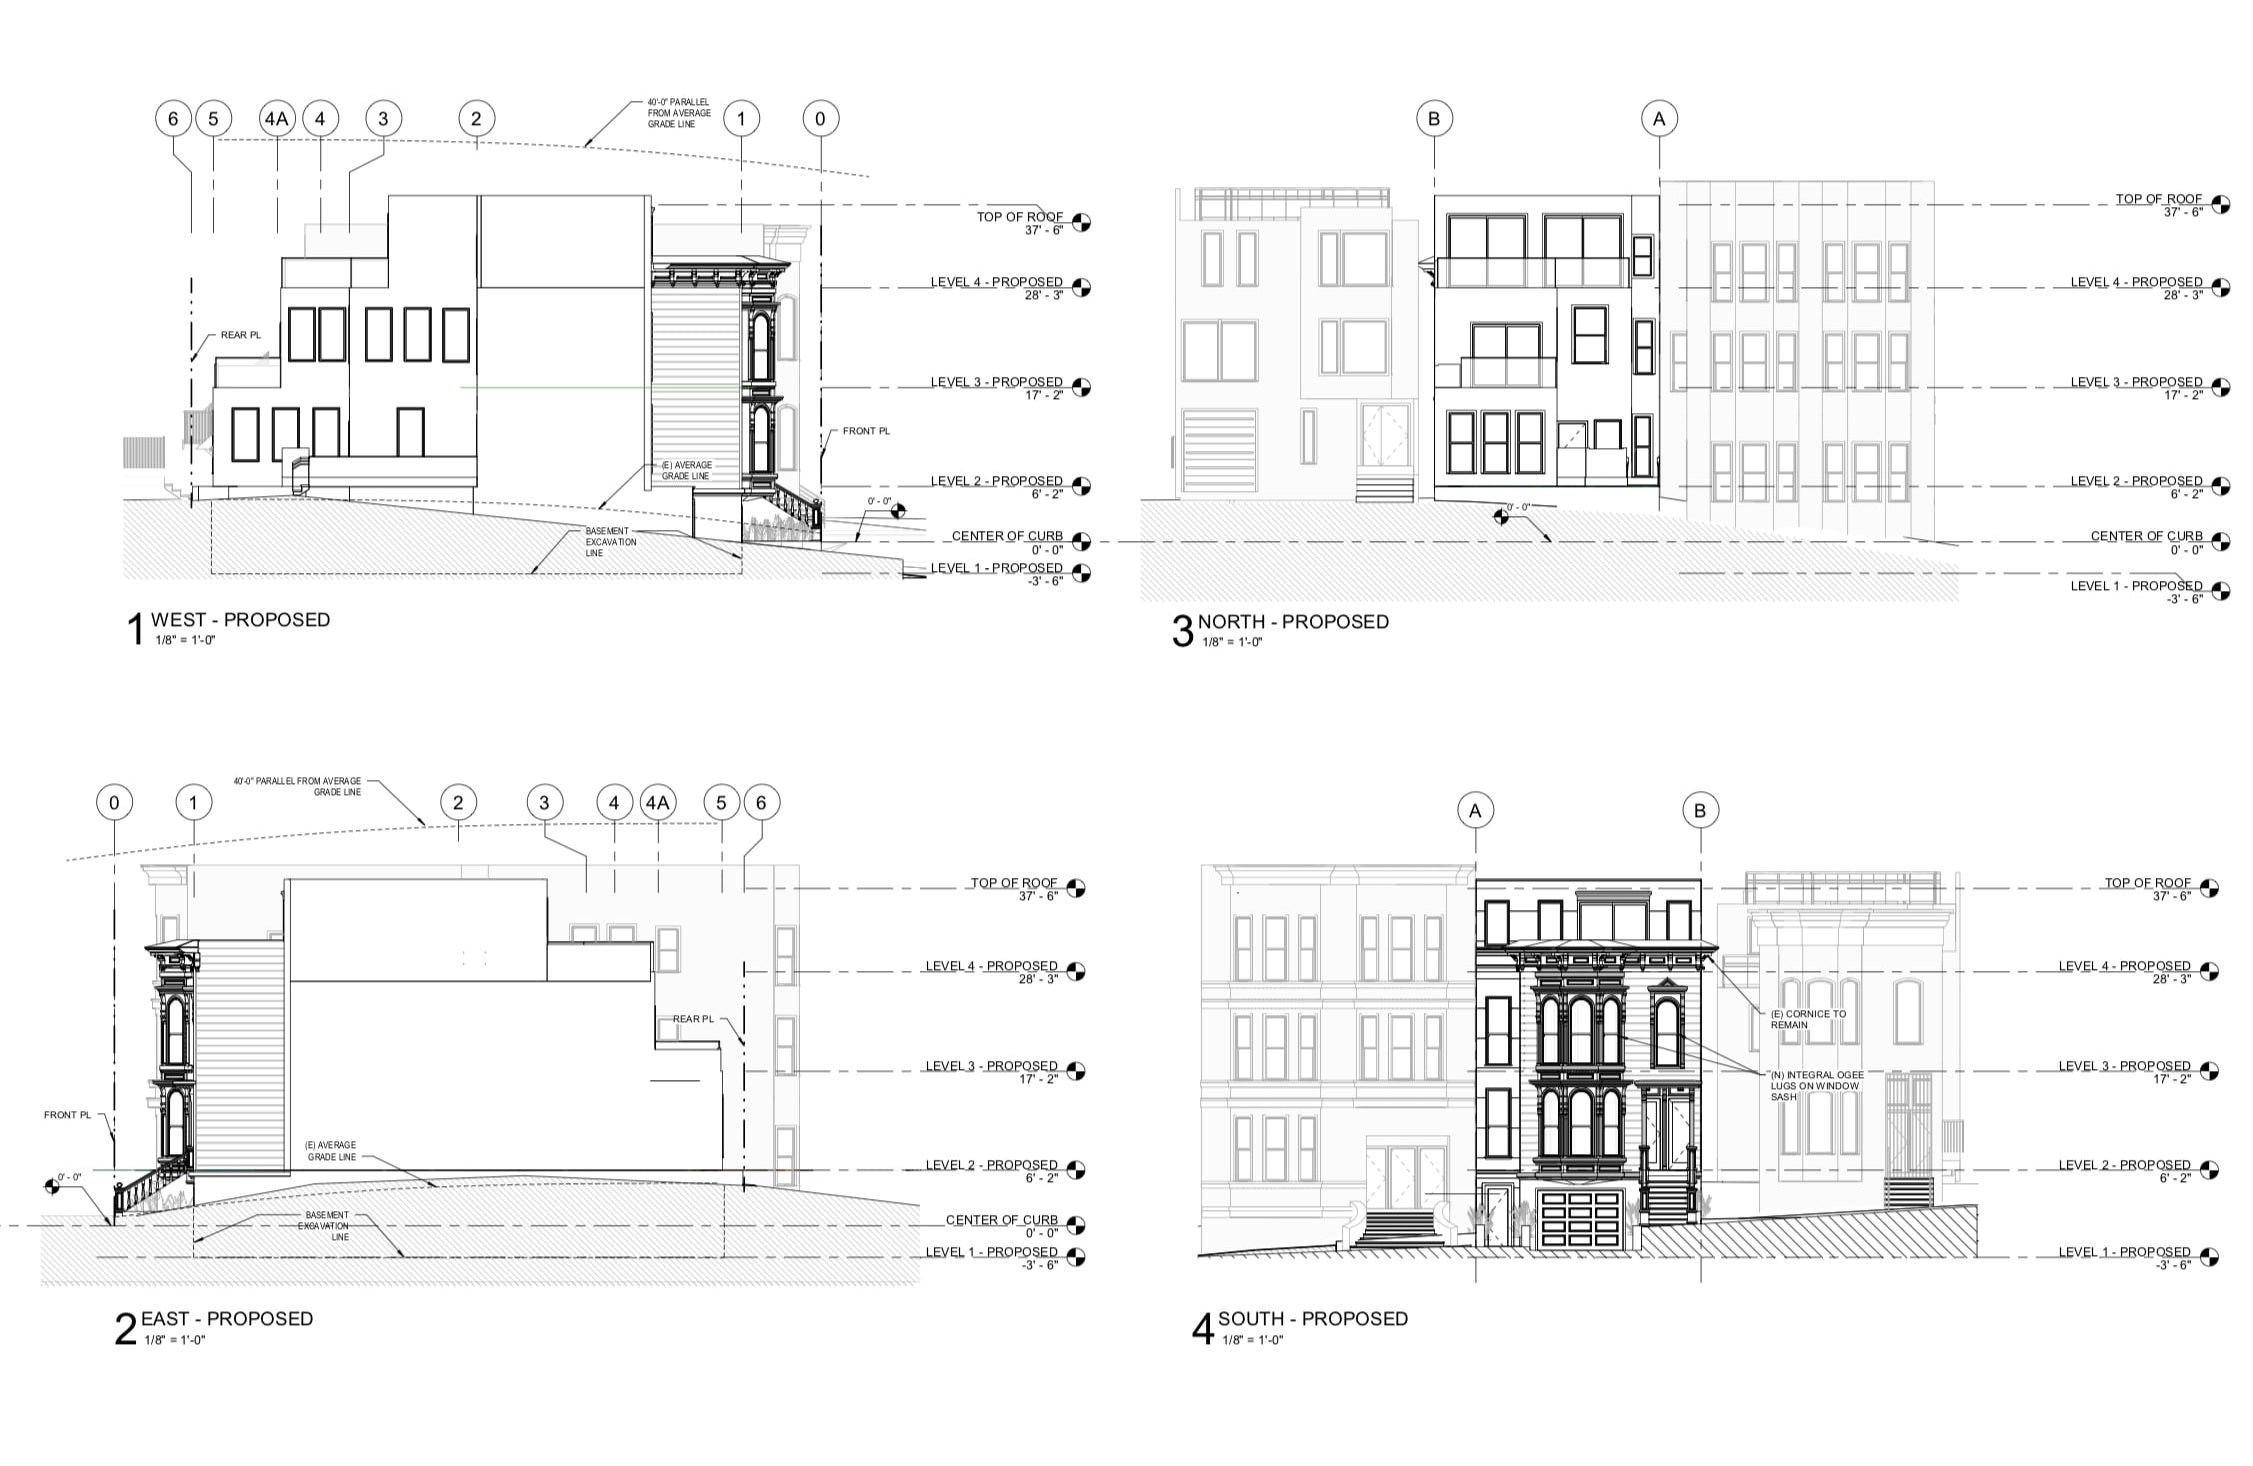 653-655 Fell Street Proposed Elevations